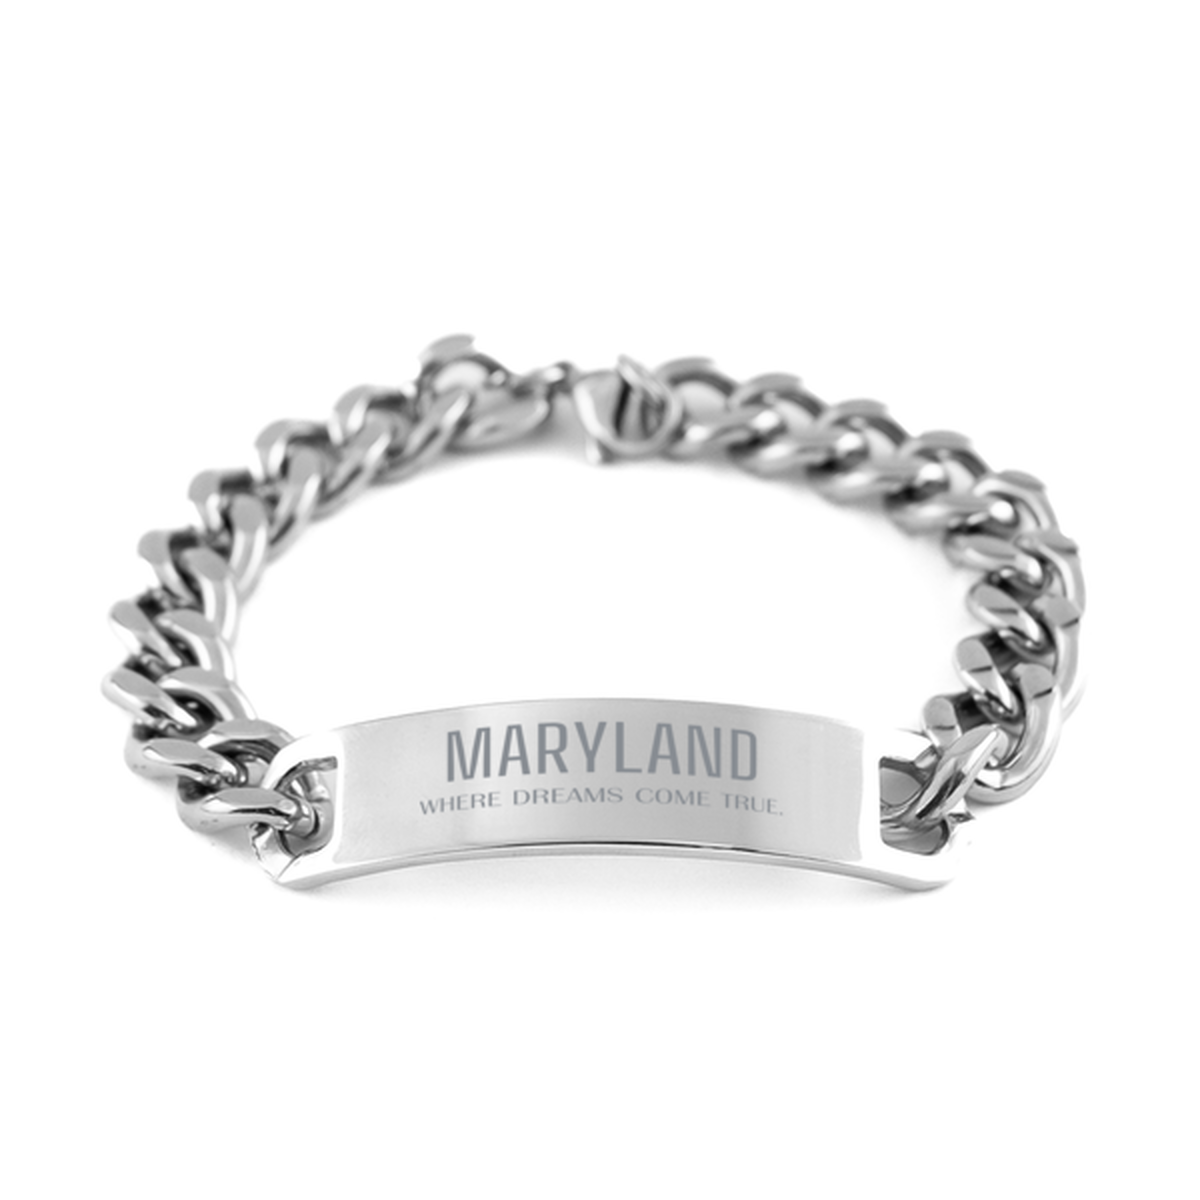 Love Maryland State Cuban Chain Stainless Steel Bracelet, Maryland Where dreams come true, Birthday Inspirational Gifts For Maryland Men, Women, Friends